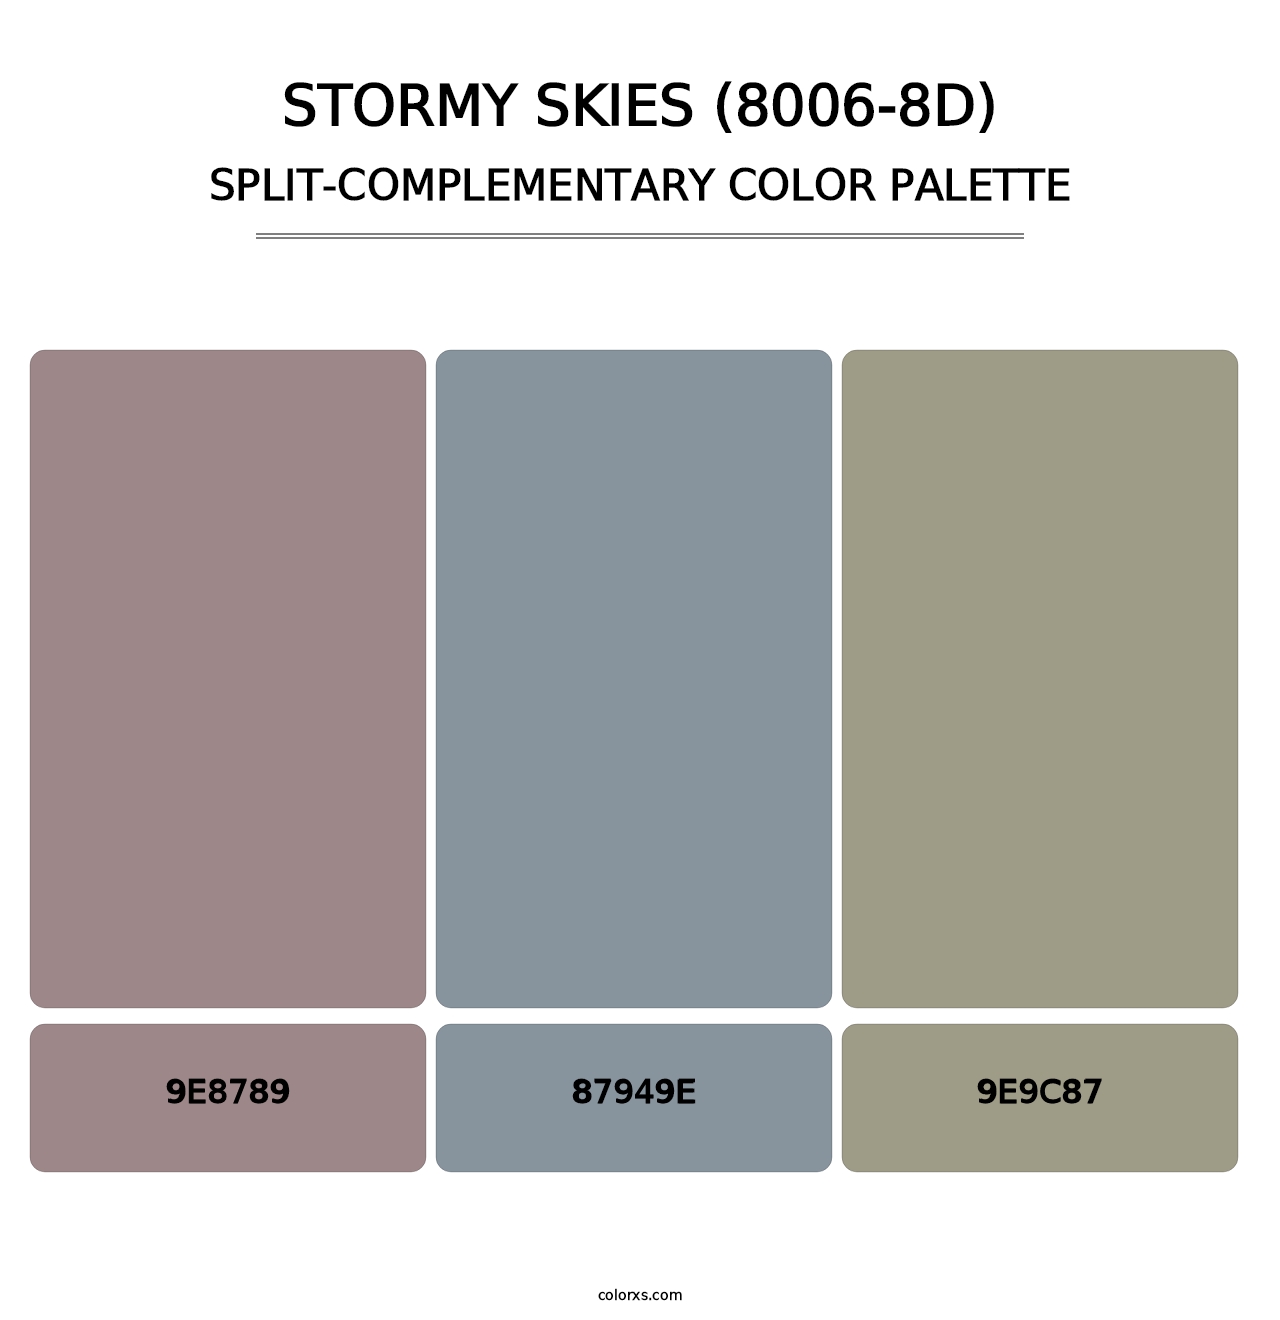 Stormy Skies (8006-8D) - Split-Complementary Color Palette